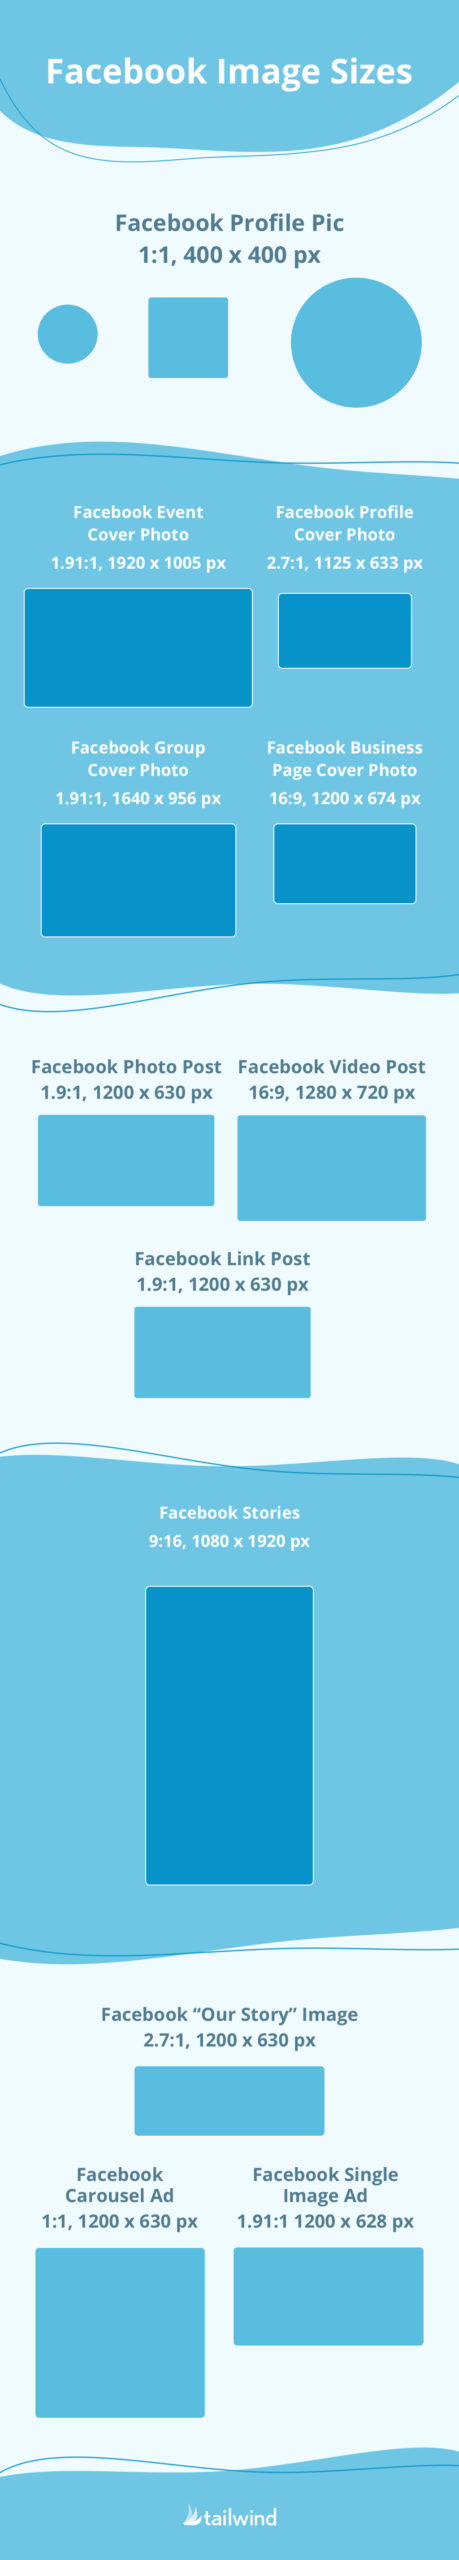 The Complete List Of Facebook Image Sizes In 21 Tailwind App